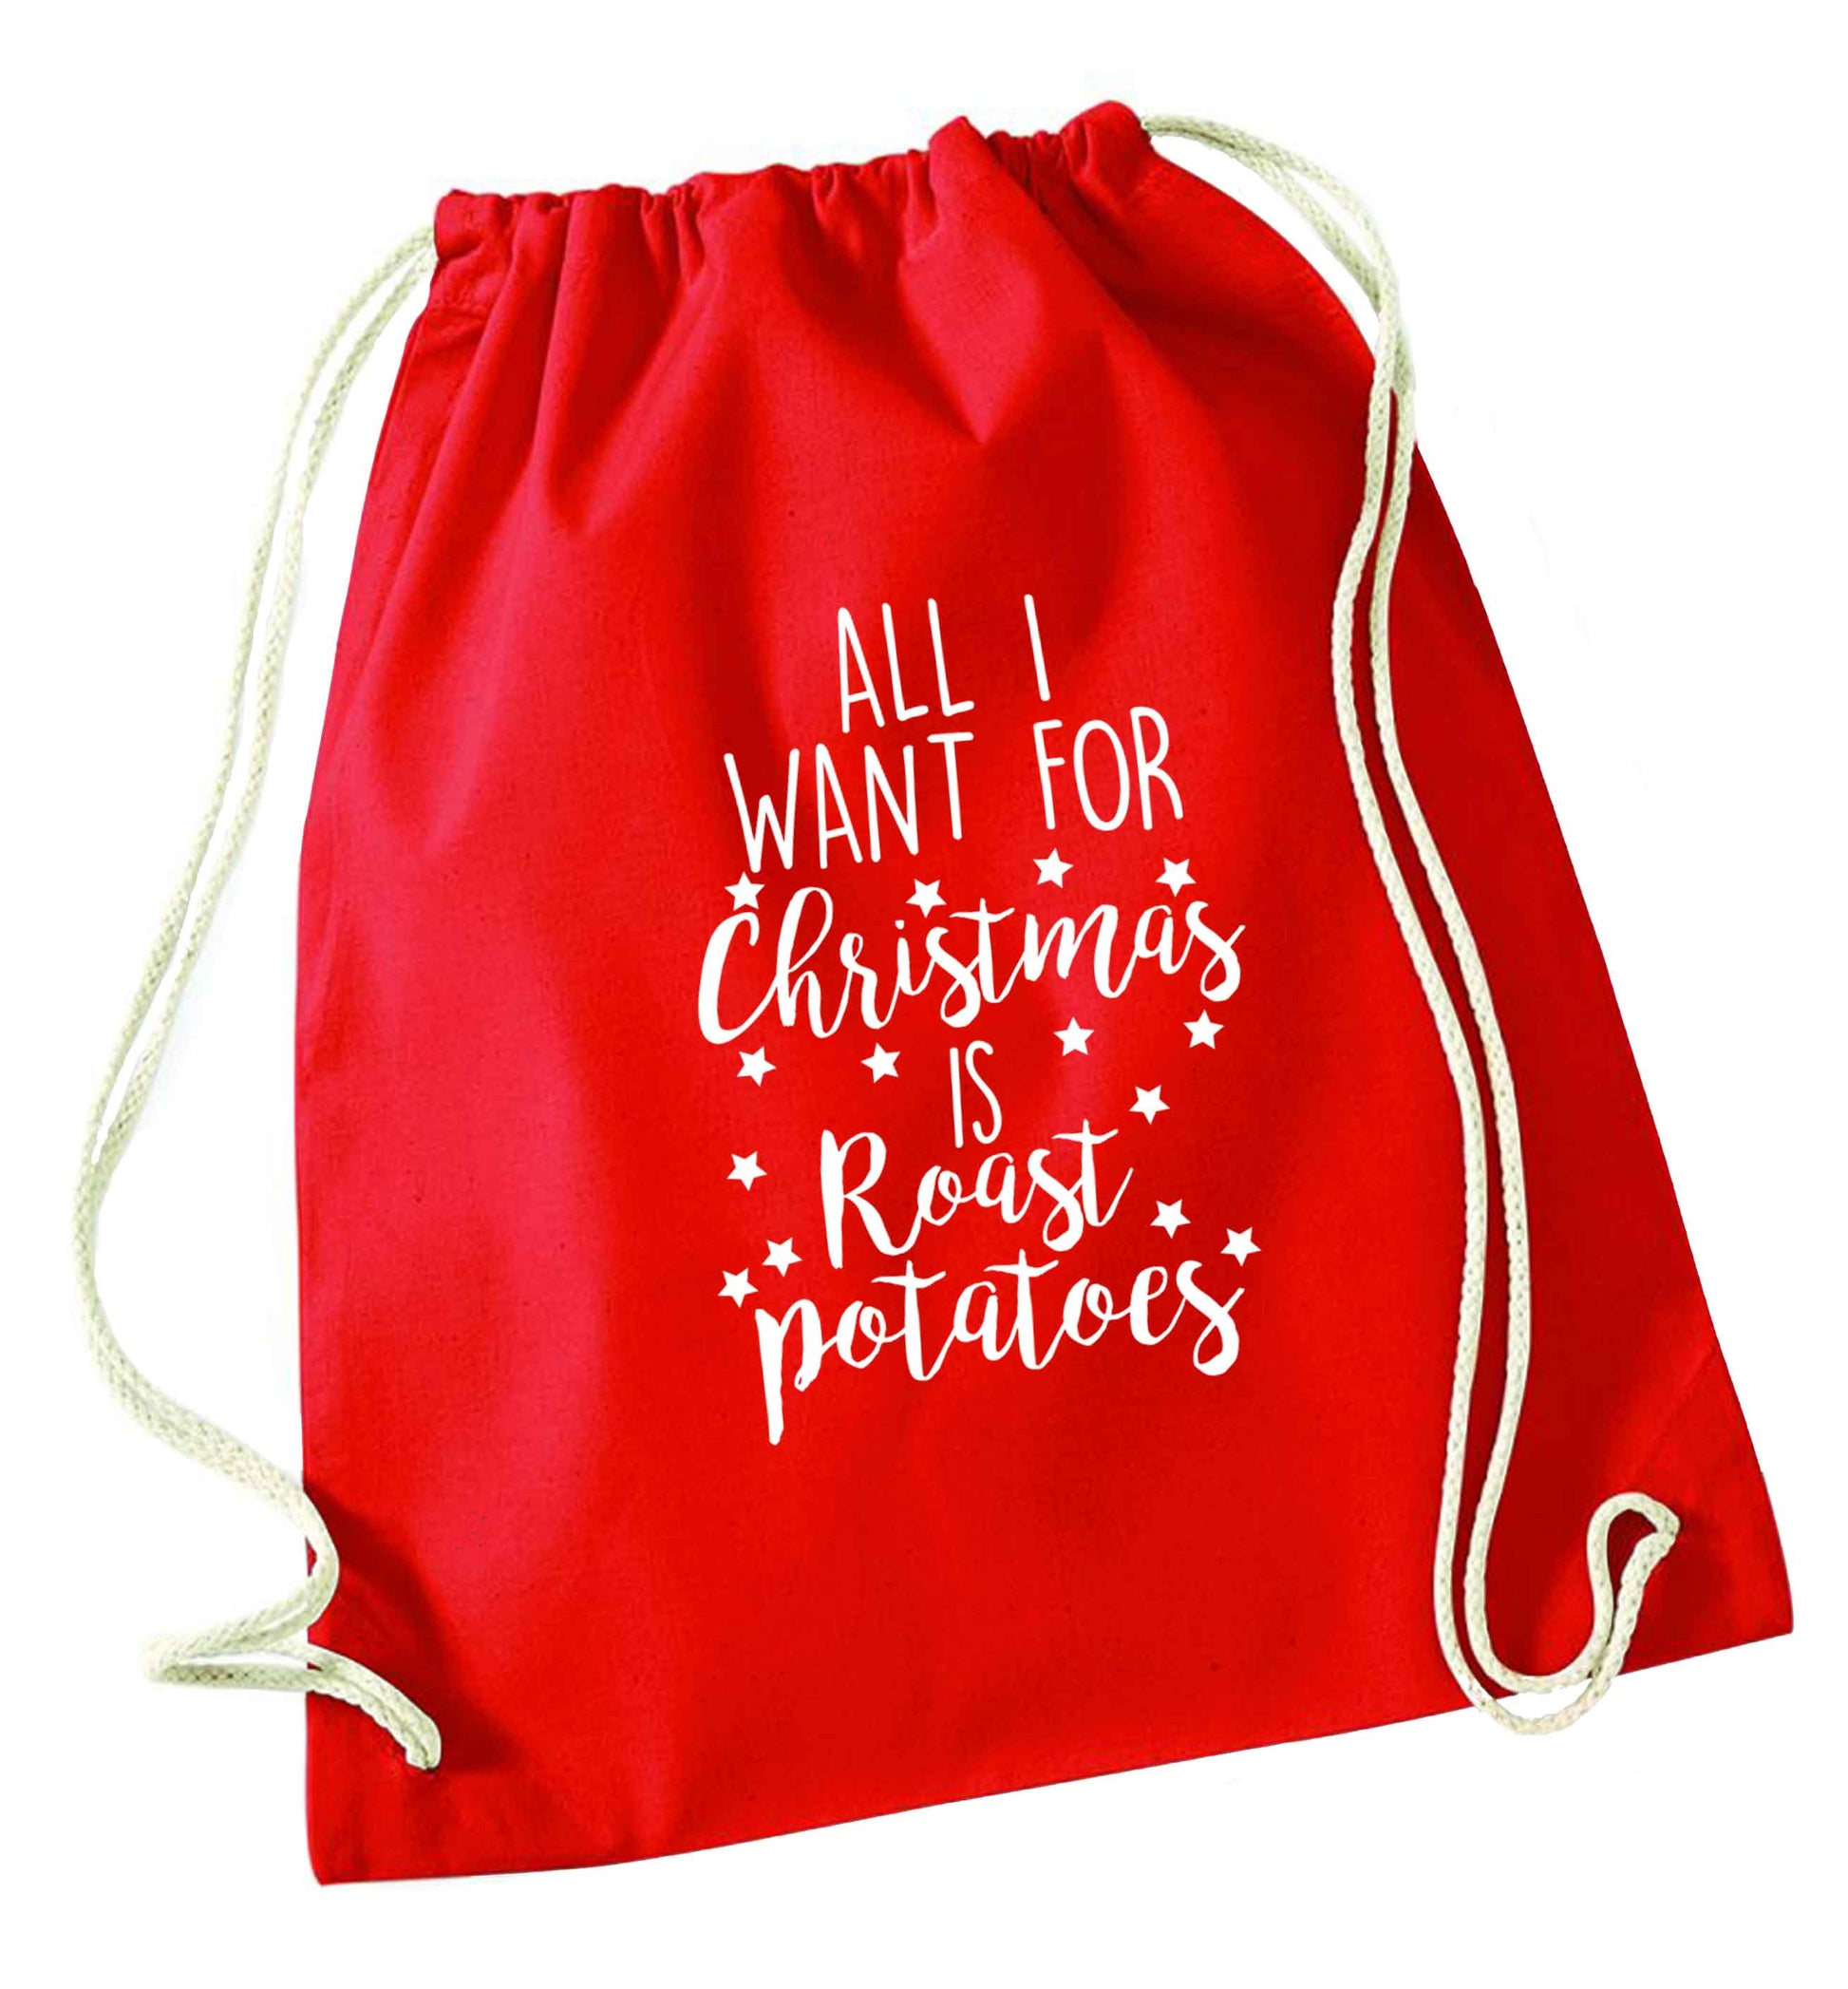 All I want for Christmas is roast potatoes red drawstring bag 